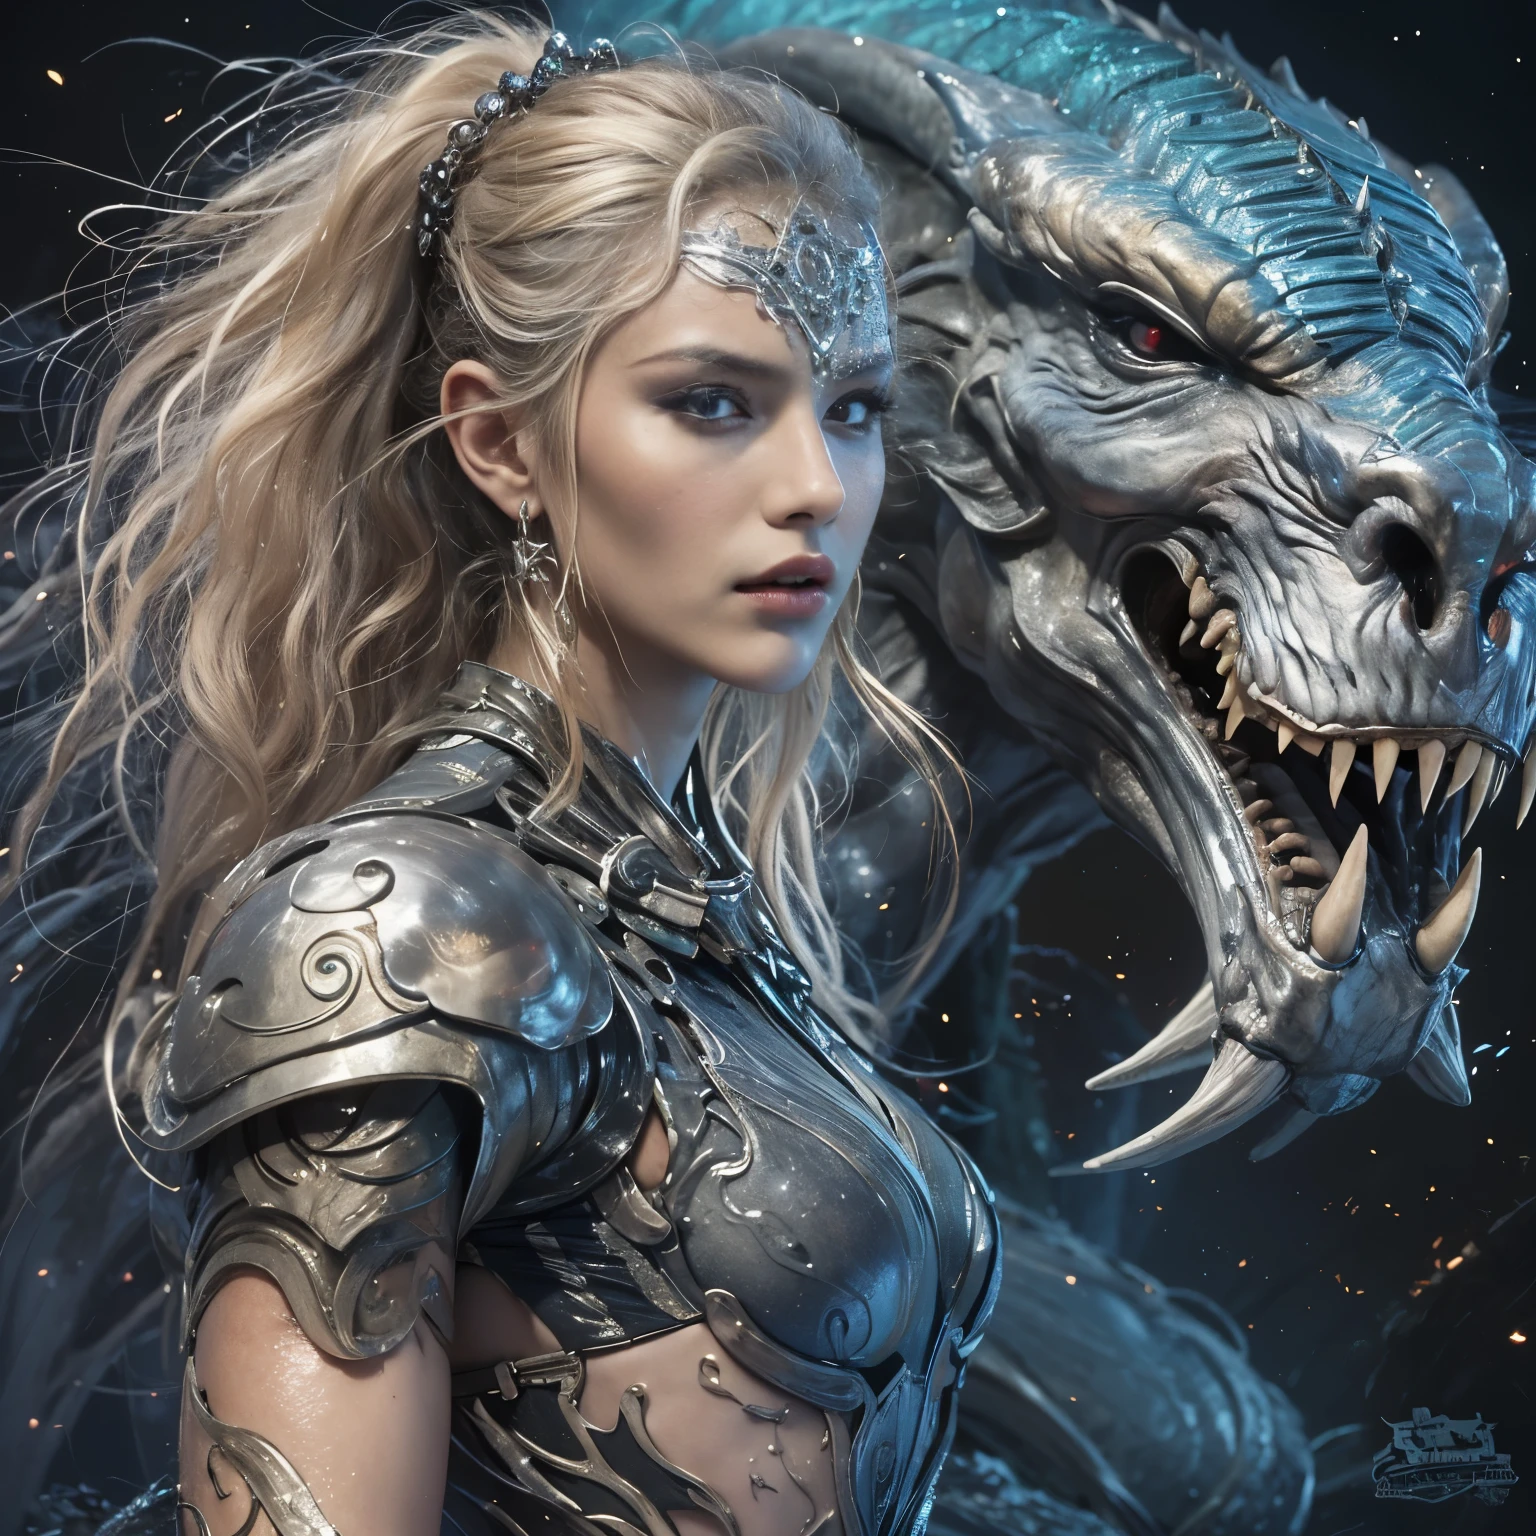 1 female alien, The predator, warrior, (extremely beautiful:1.2), (intense gaze:1.4), (predator:1.1), long dark claws, NSFW,  nipples, thick eyebrows, glowing and shining sky blue eyes, the most beautiful face in the universe, platinum blonde,

A woman with an extremely beautiful face, her intense gaze fixed on her prey, a primal force that could not be denied.

(extreamly beautiful lean body:1.5), (ultra muscular build:1.2), (prowling:1.3), (sleek movements:1.4),

Her beautiful body, muscular and toned, moved with sleek grace as she prowled, ready to strike at a moment's notice. The predator within her was always on